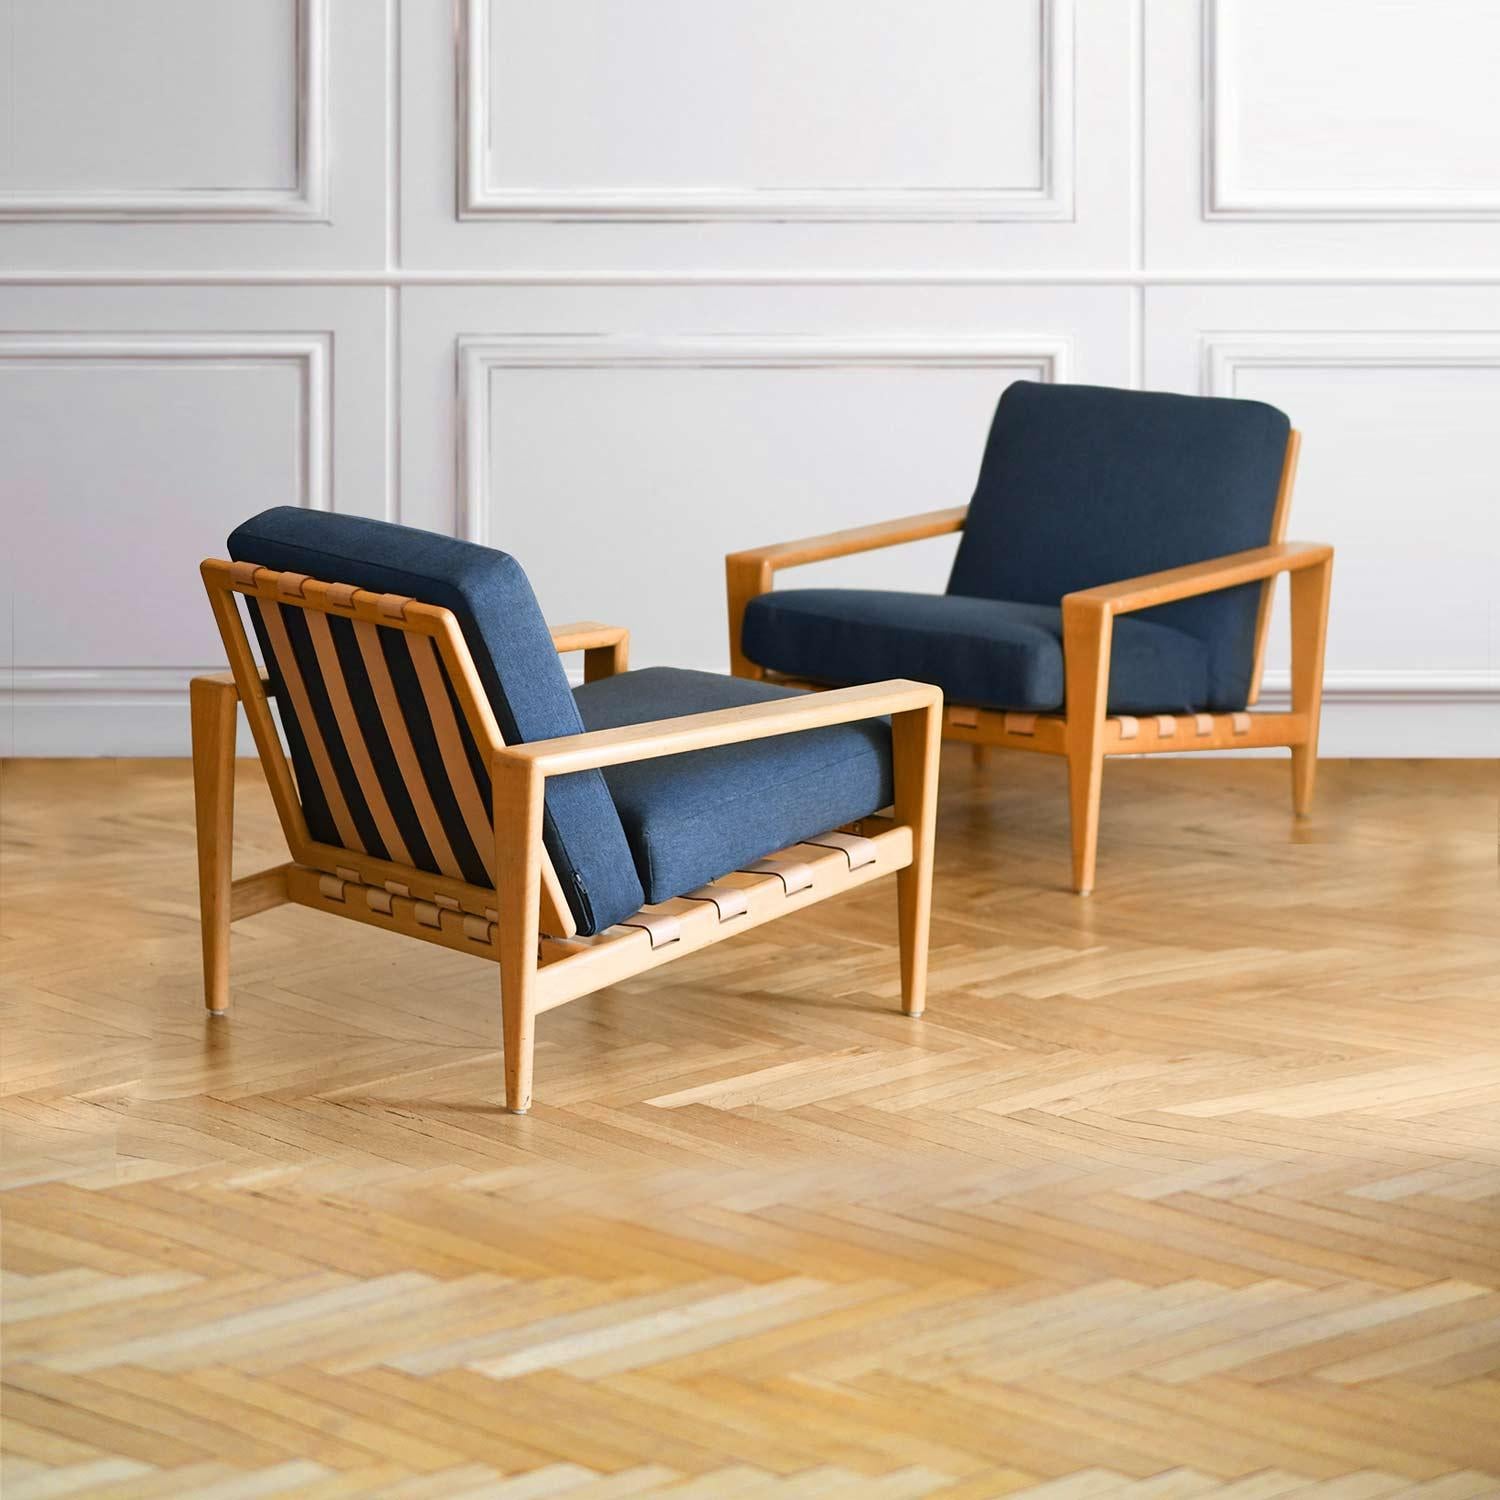 Pair of Svante Skogh 1957 “Bodo” armchairs in Swedish oak
PRODUCT DETAILS
Dimensions: 75w x 72h x 62dcm
Materials: oak wood, fabric
Production: Saffle Mobler 1957
The coordinated sofa can be purchased separately, see our storefront for more details.